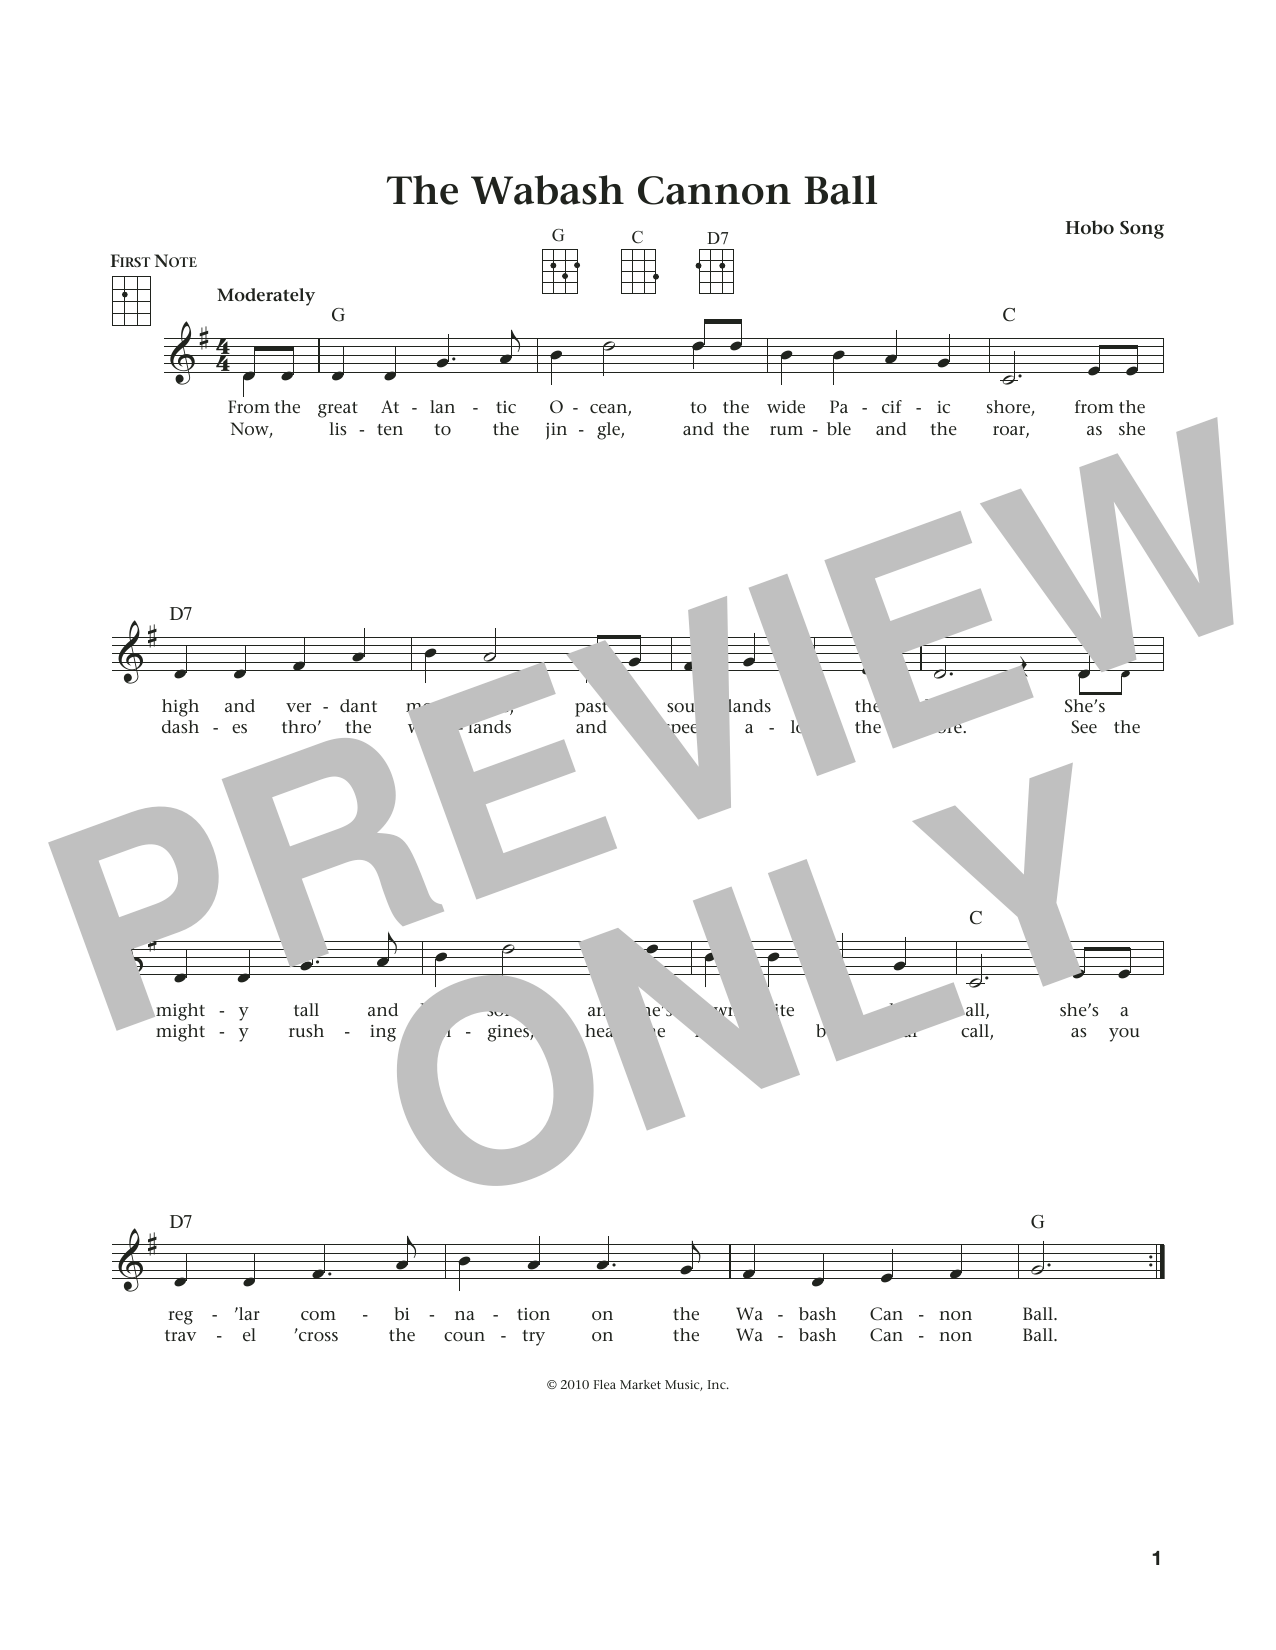 Download Hobo Song The Wabash Cannon Ball (from The Daily Sheet Music